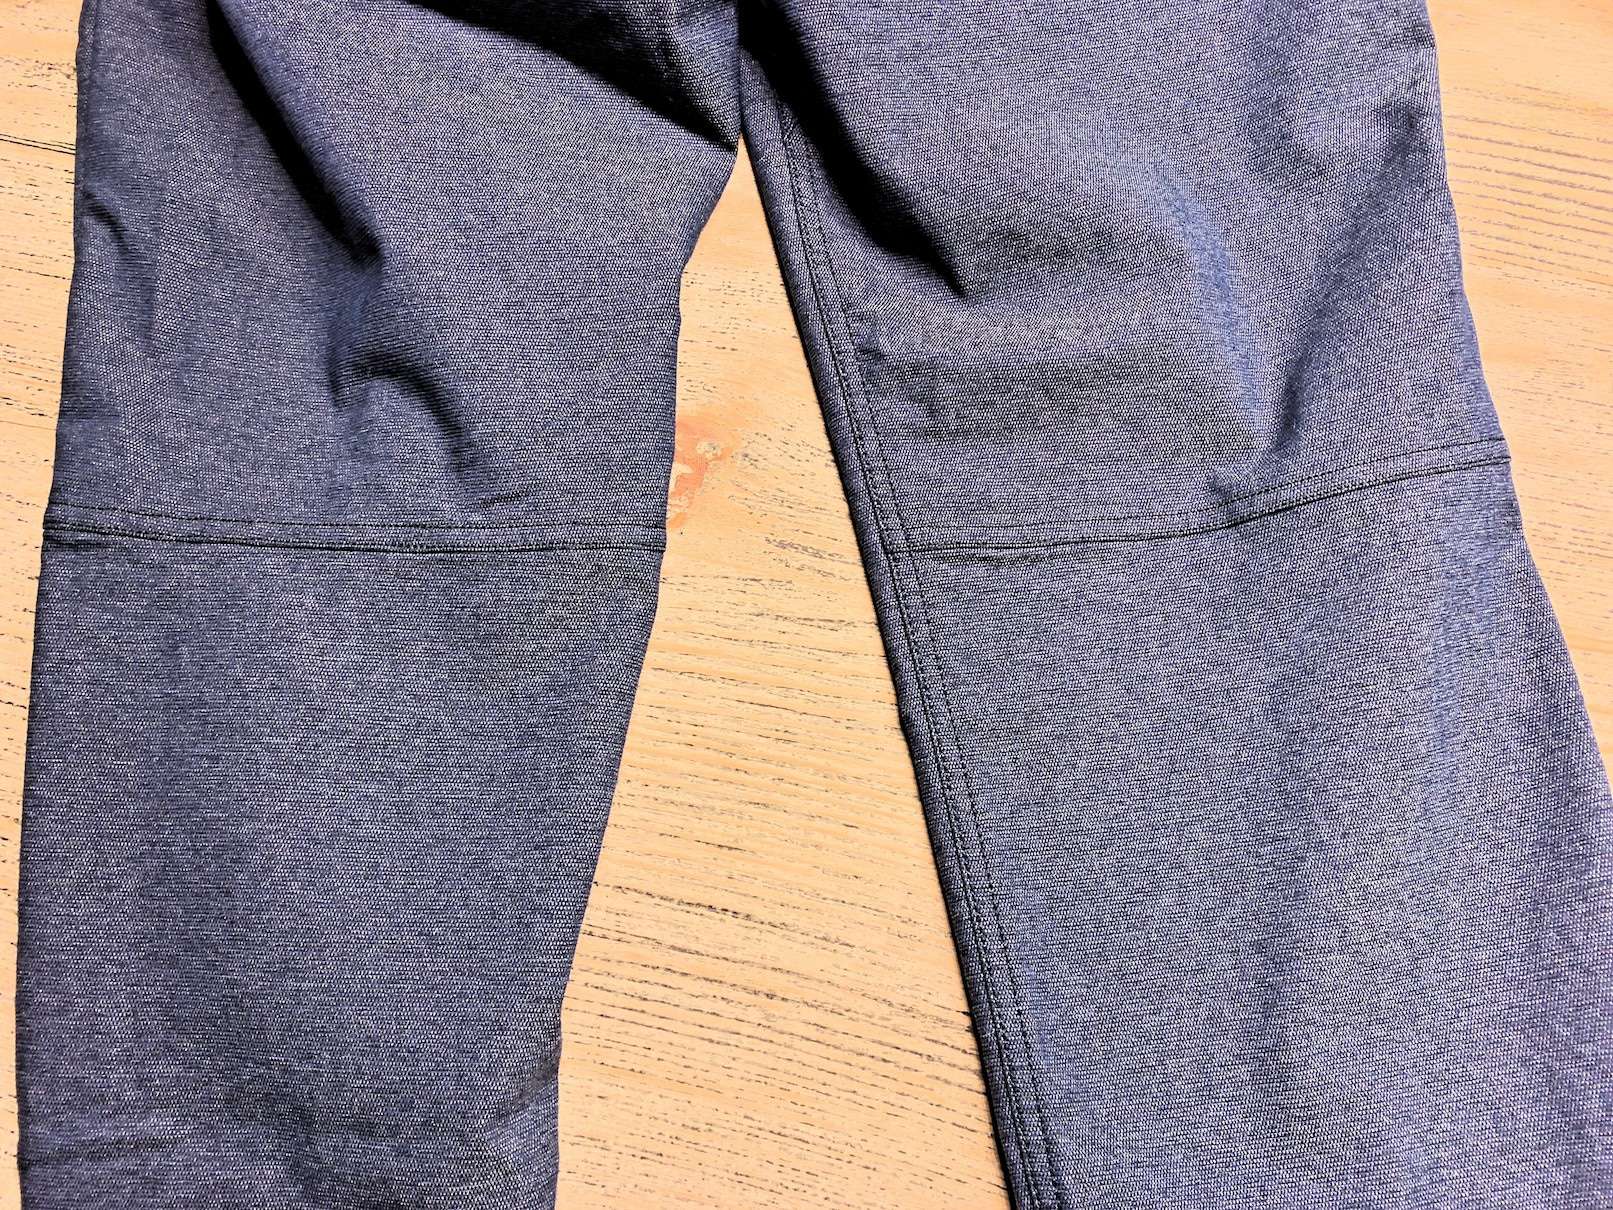 Lululemon "Jeans" are Here: Lululemon Tech Canvas Review 5